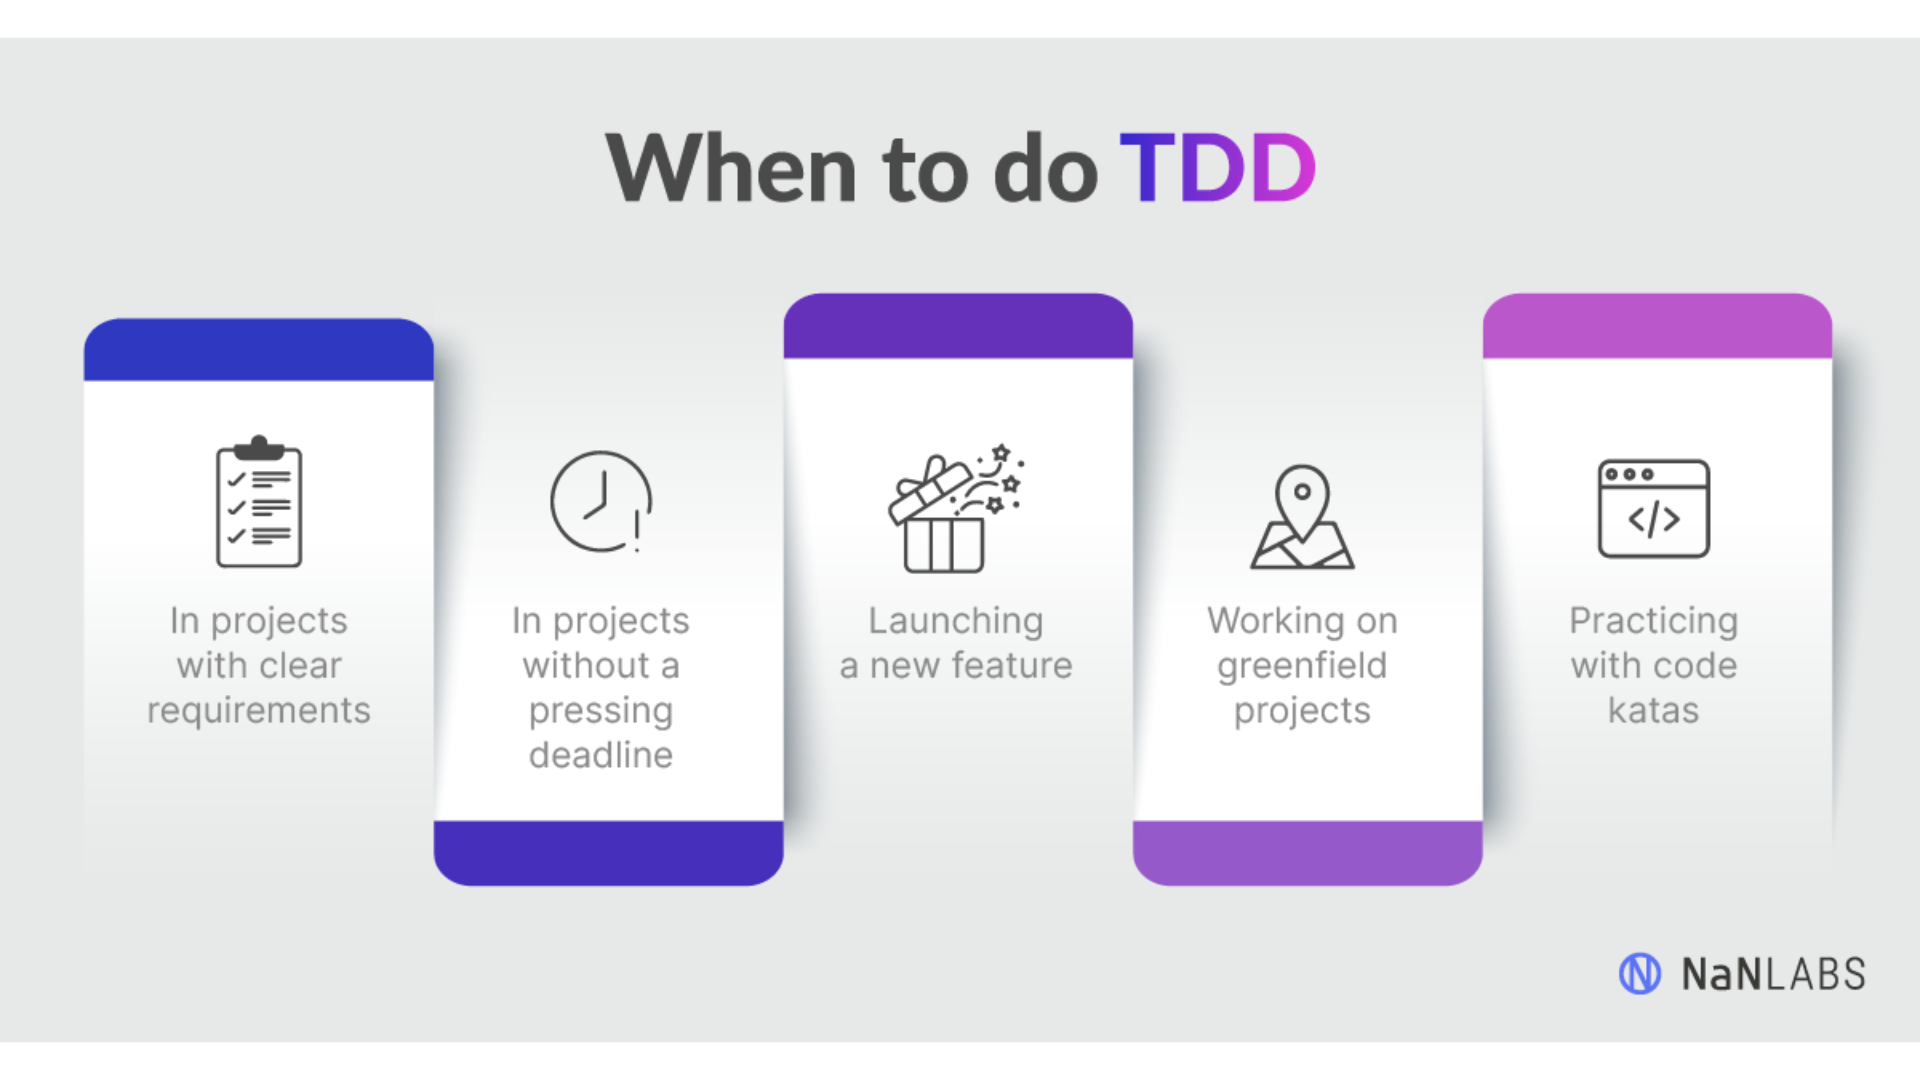 When to do TDD